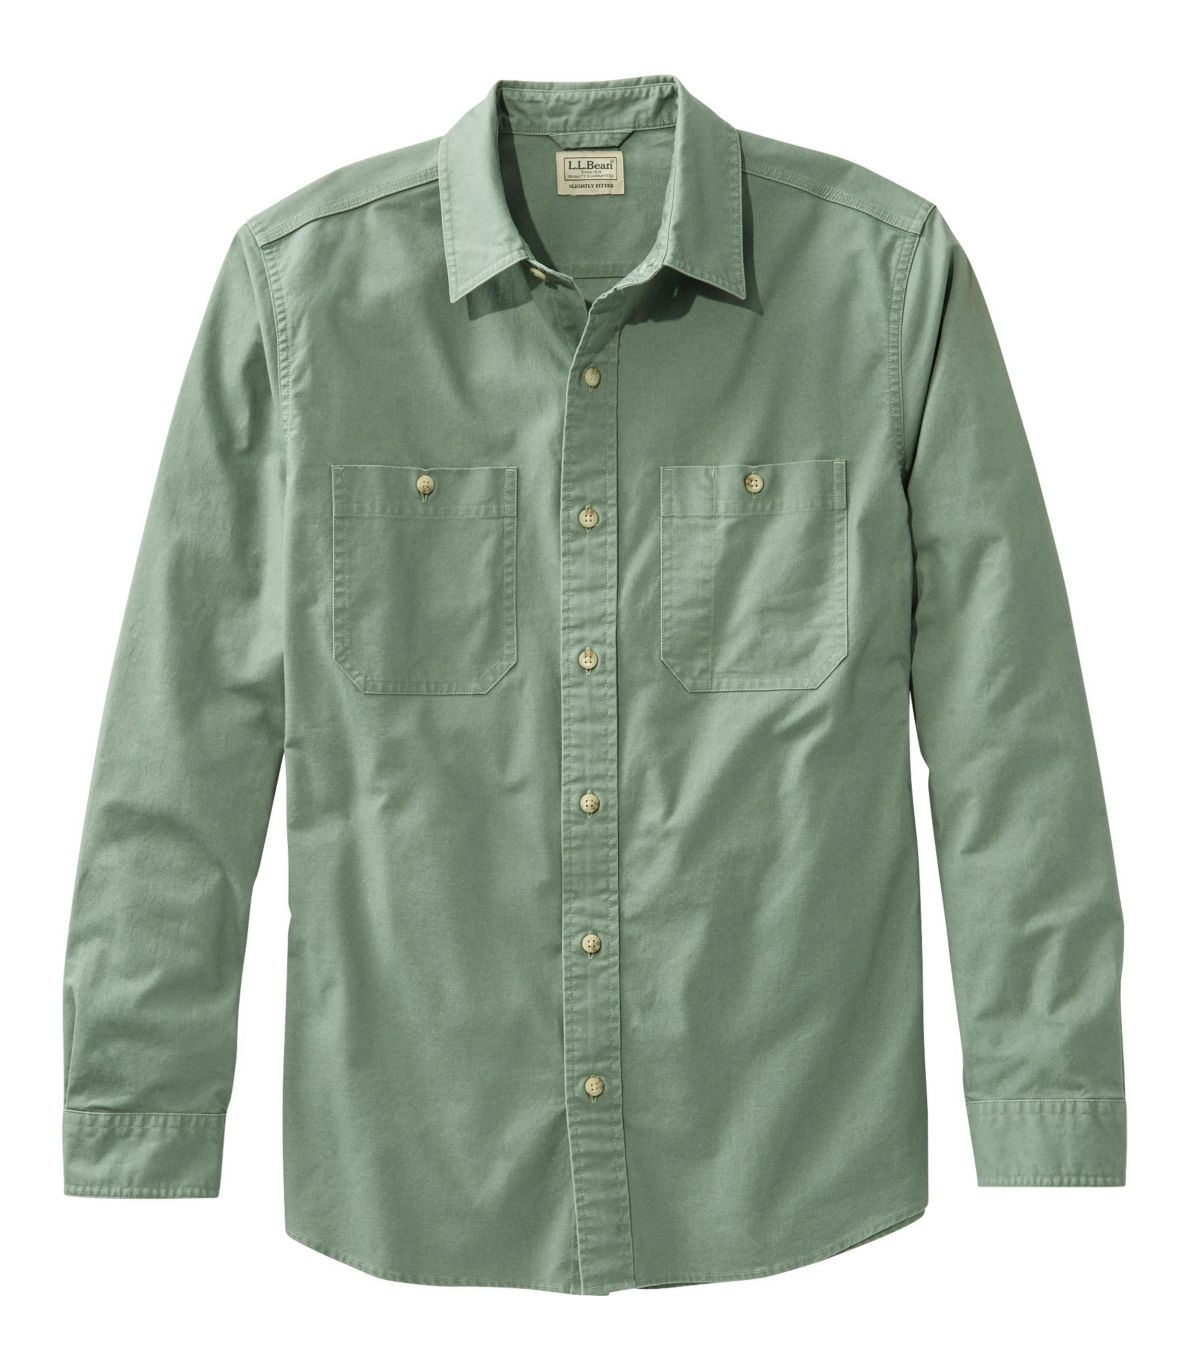 Men's Sunwashed Canvas Shirt, Slightly Fitted, Long-Sleeve at L.L. Bean